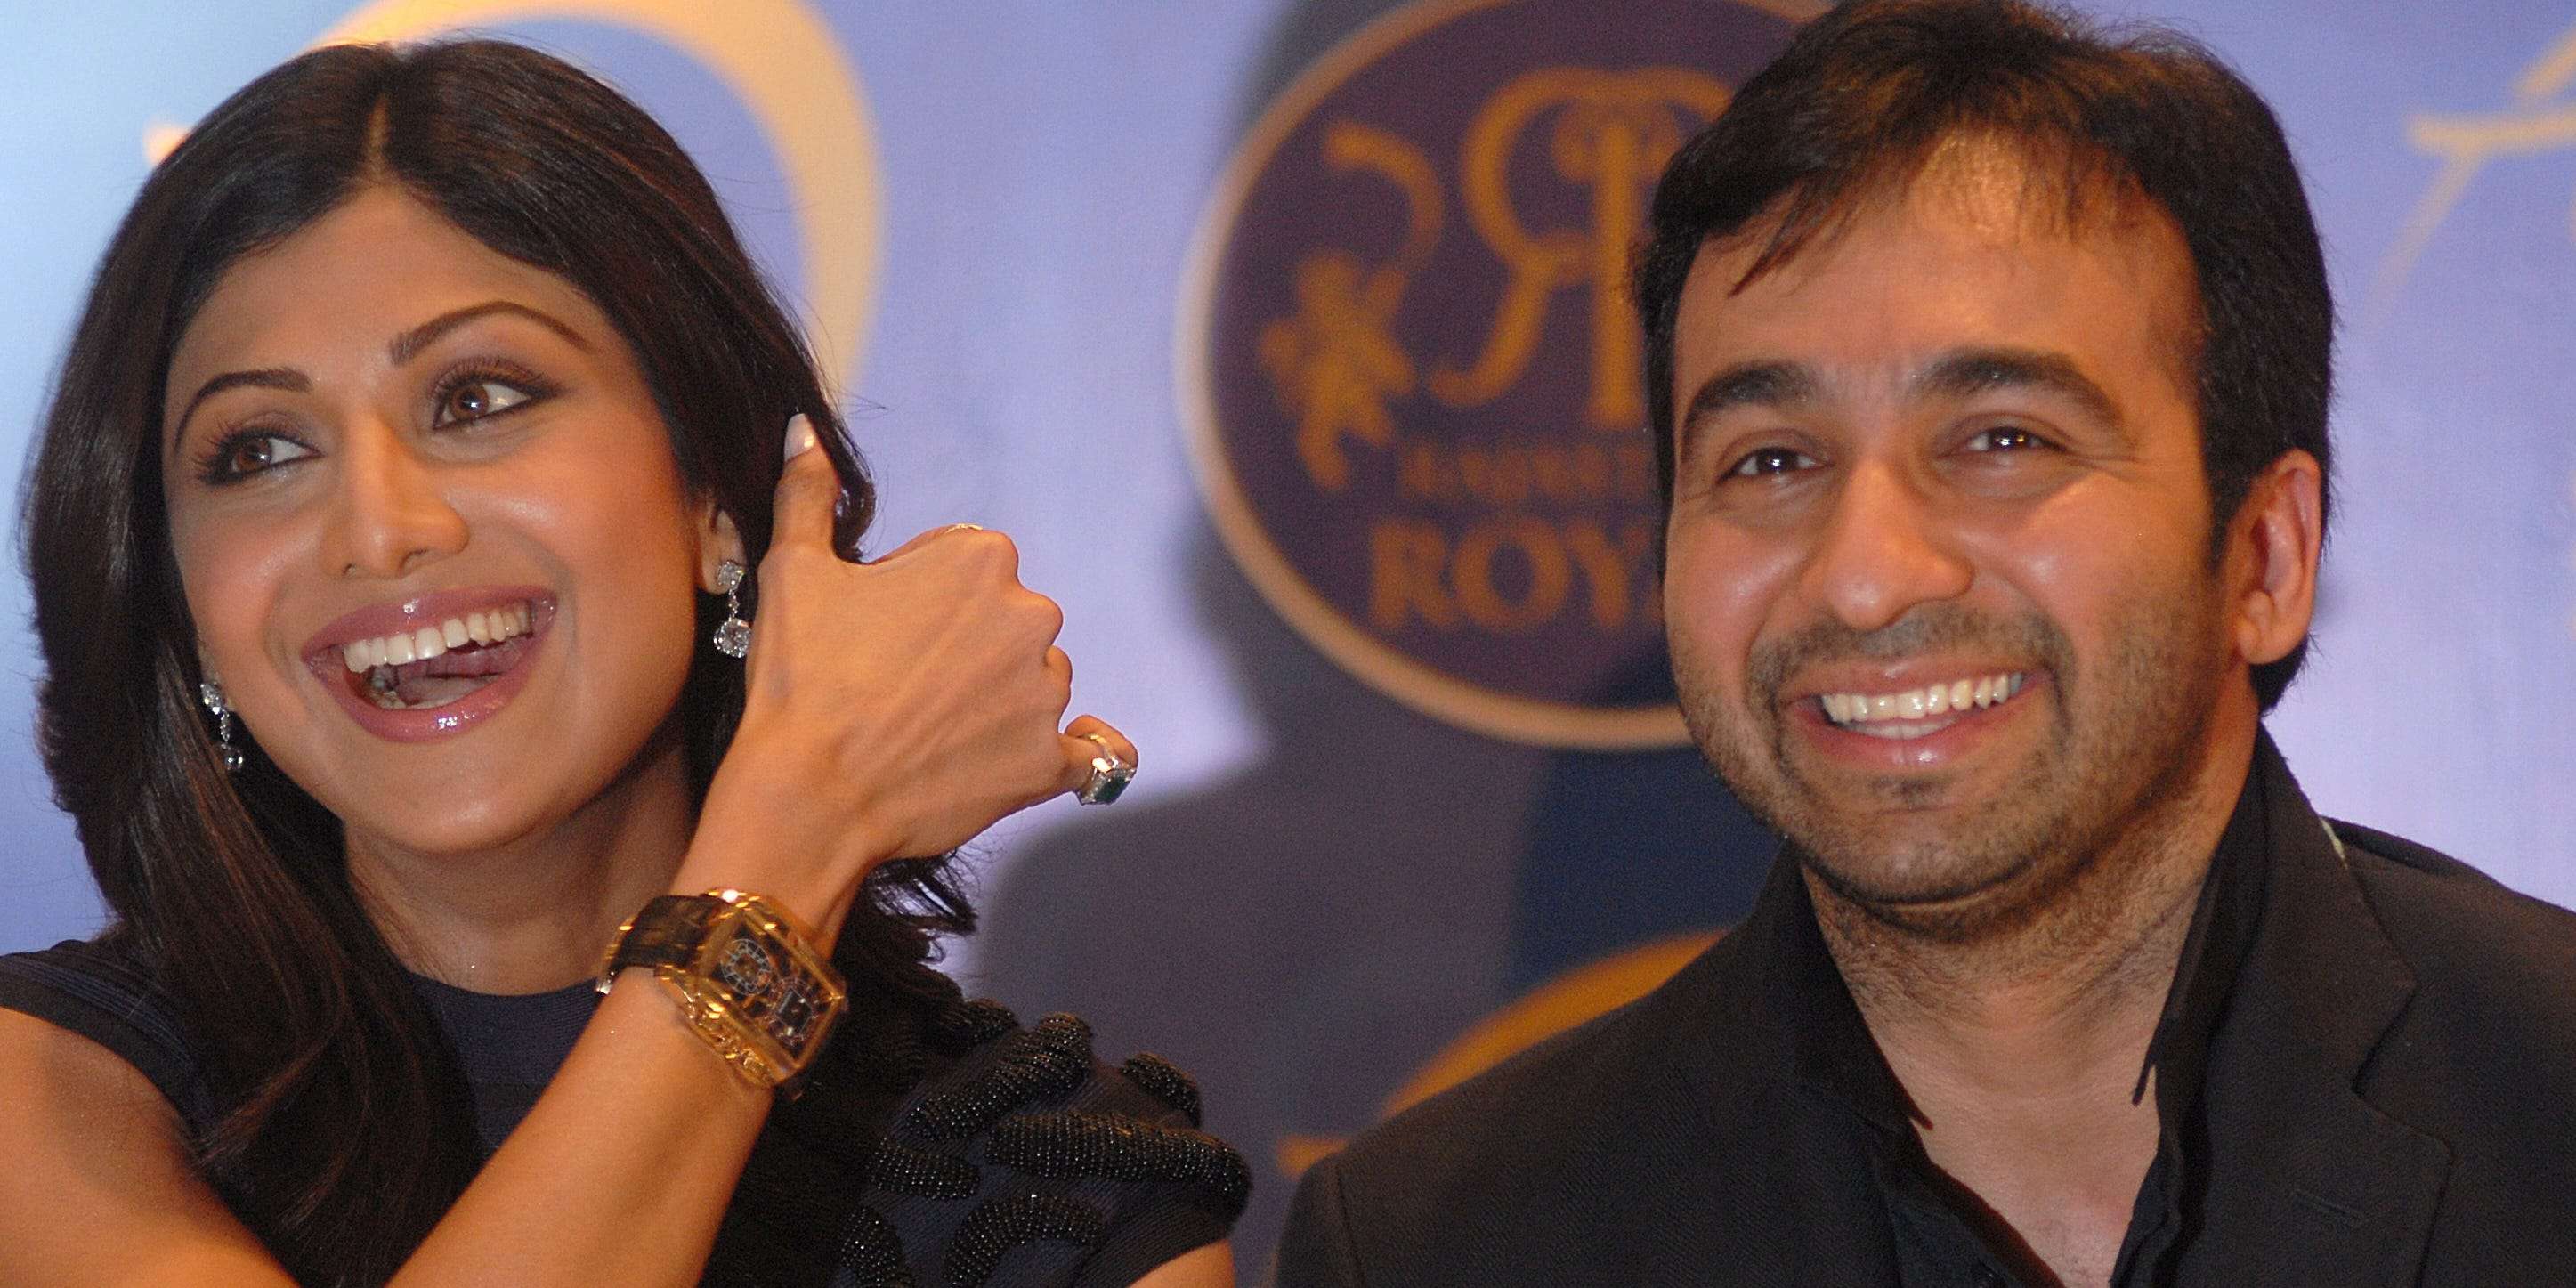 Millionaire married to Bollywood star is investigated for involvement in porn ring that coerced women into sex videos Business Insider India image